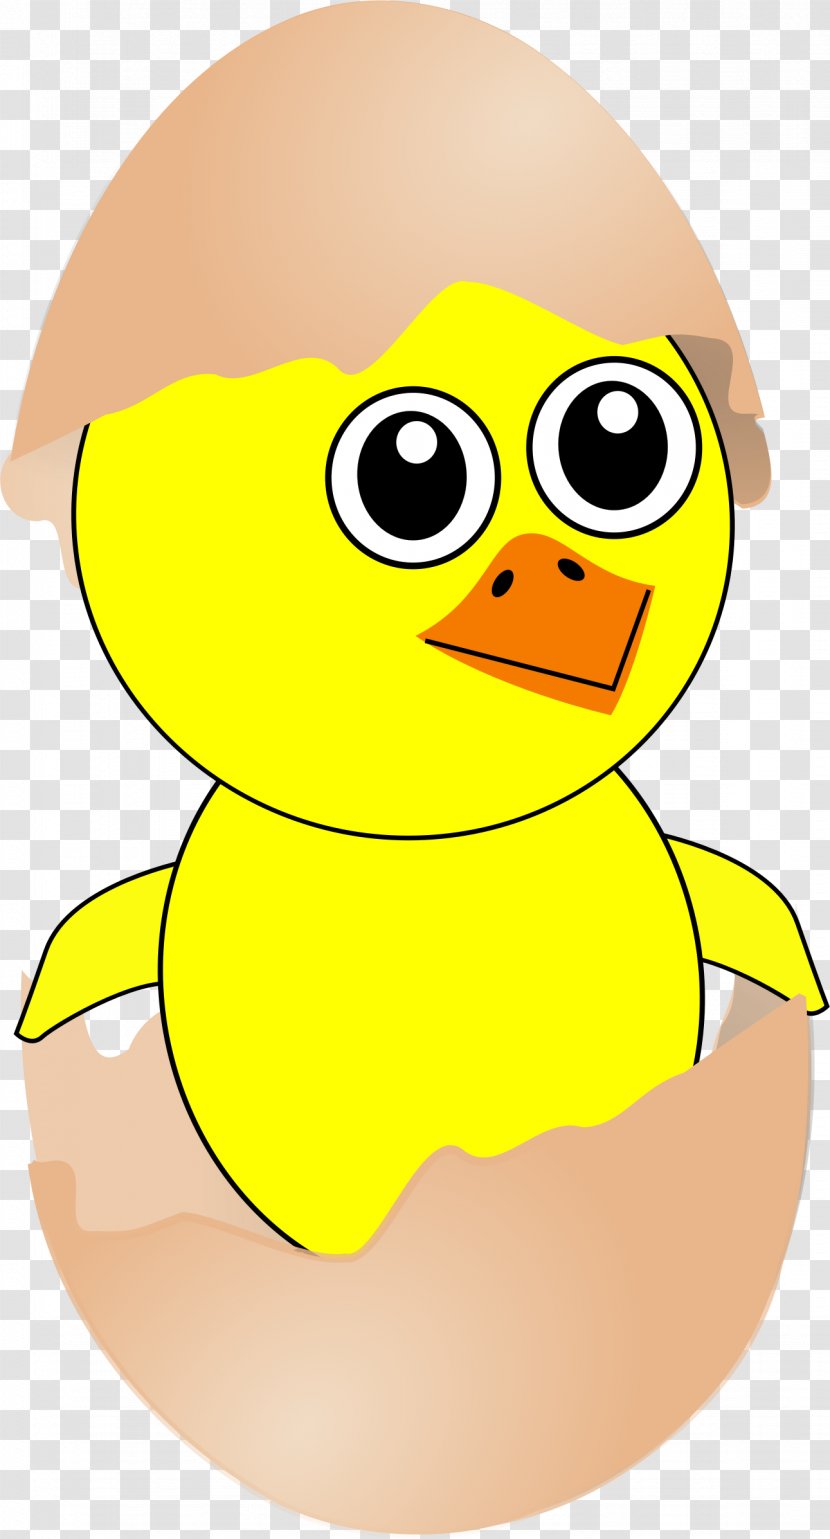 Chicken Egg Cartoon Drawing - Duck - Chick Cliparts Transparent PNG